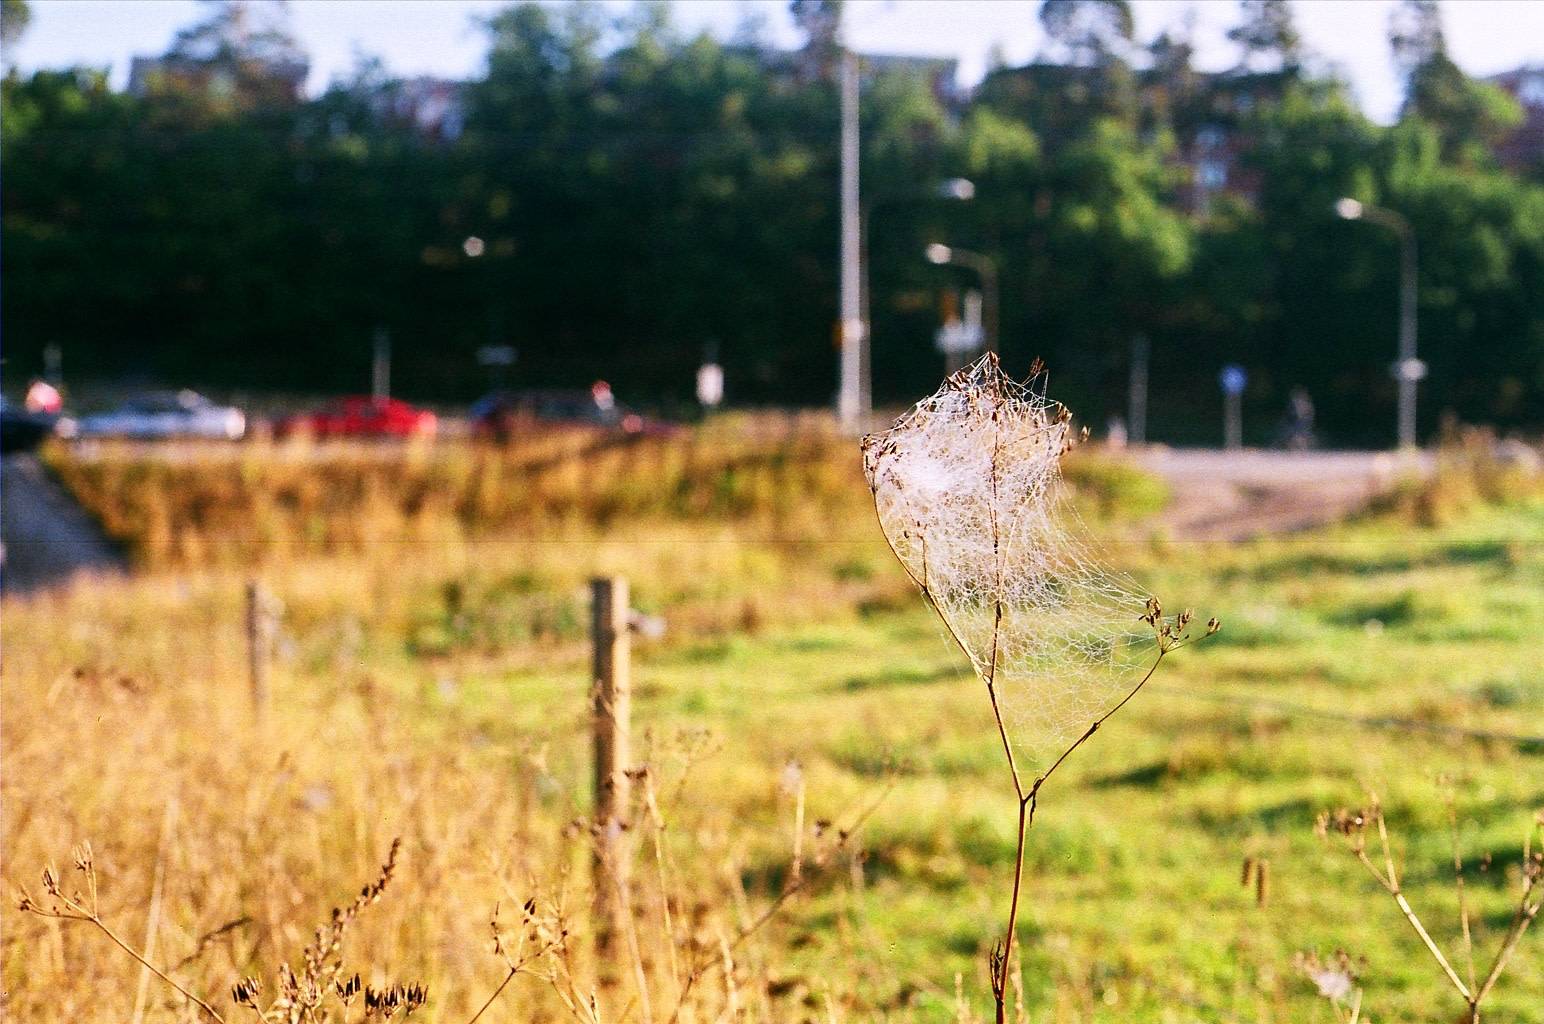 cluster of spider web on a piece of dry plant, grassland, driveway, trees and buildings on the blurry background